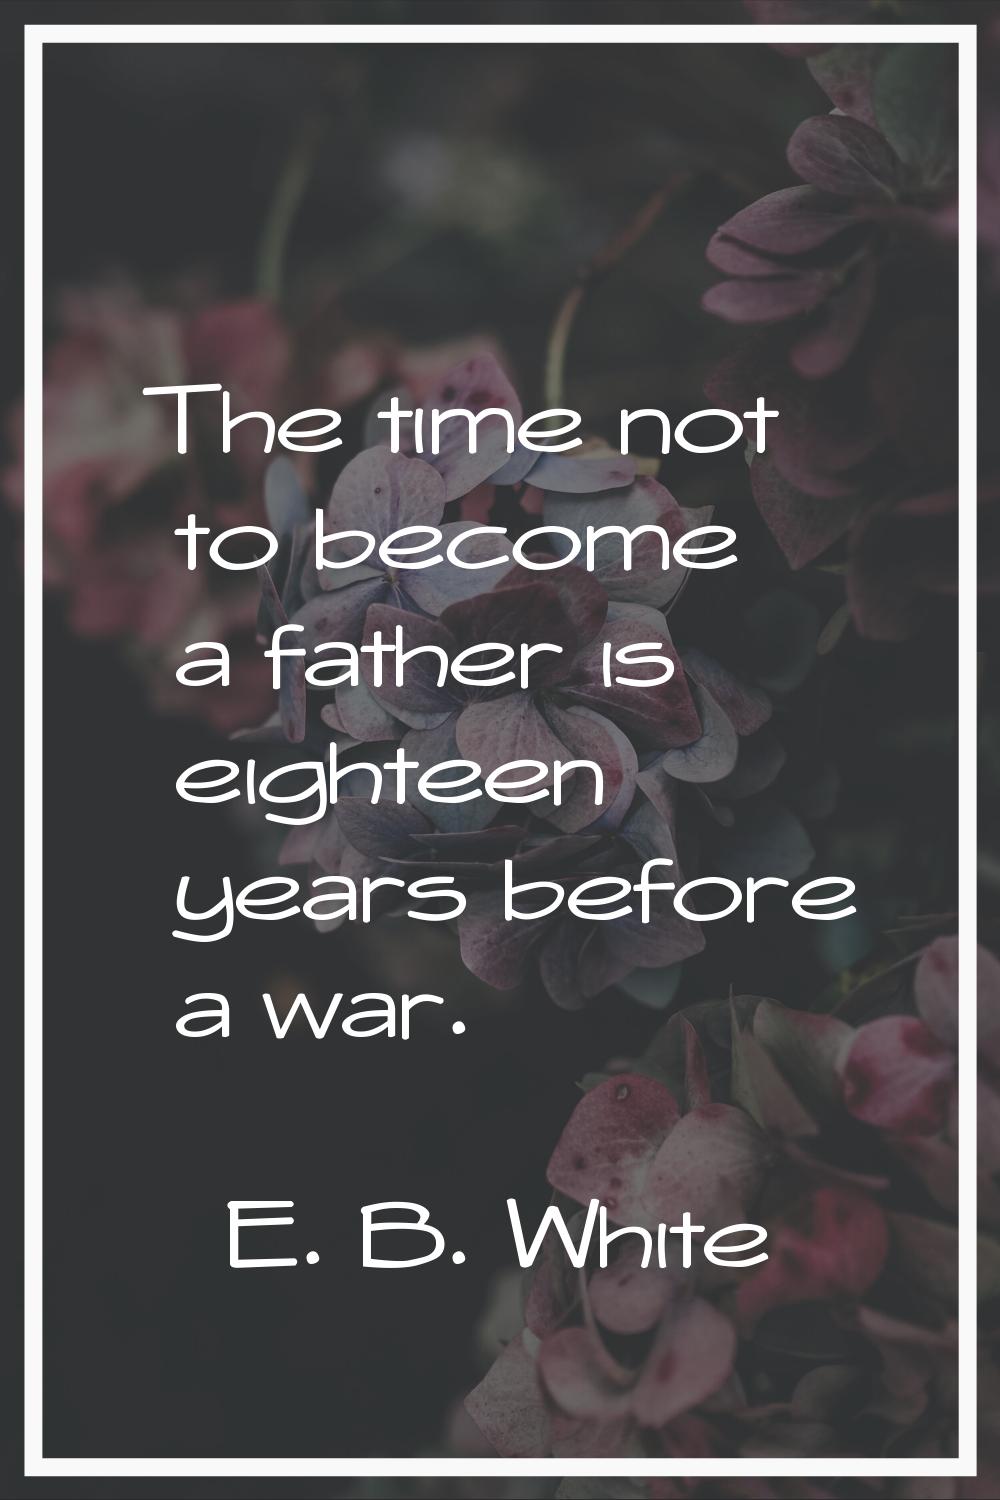 The time not to become a father is eighteen years before a war.